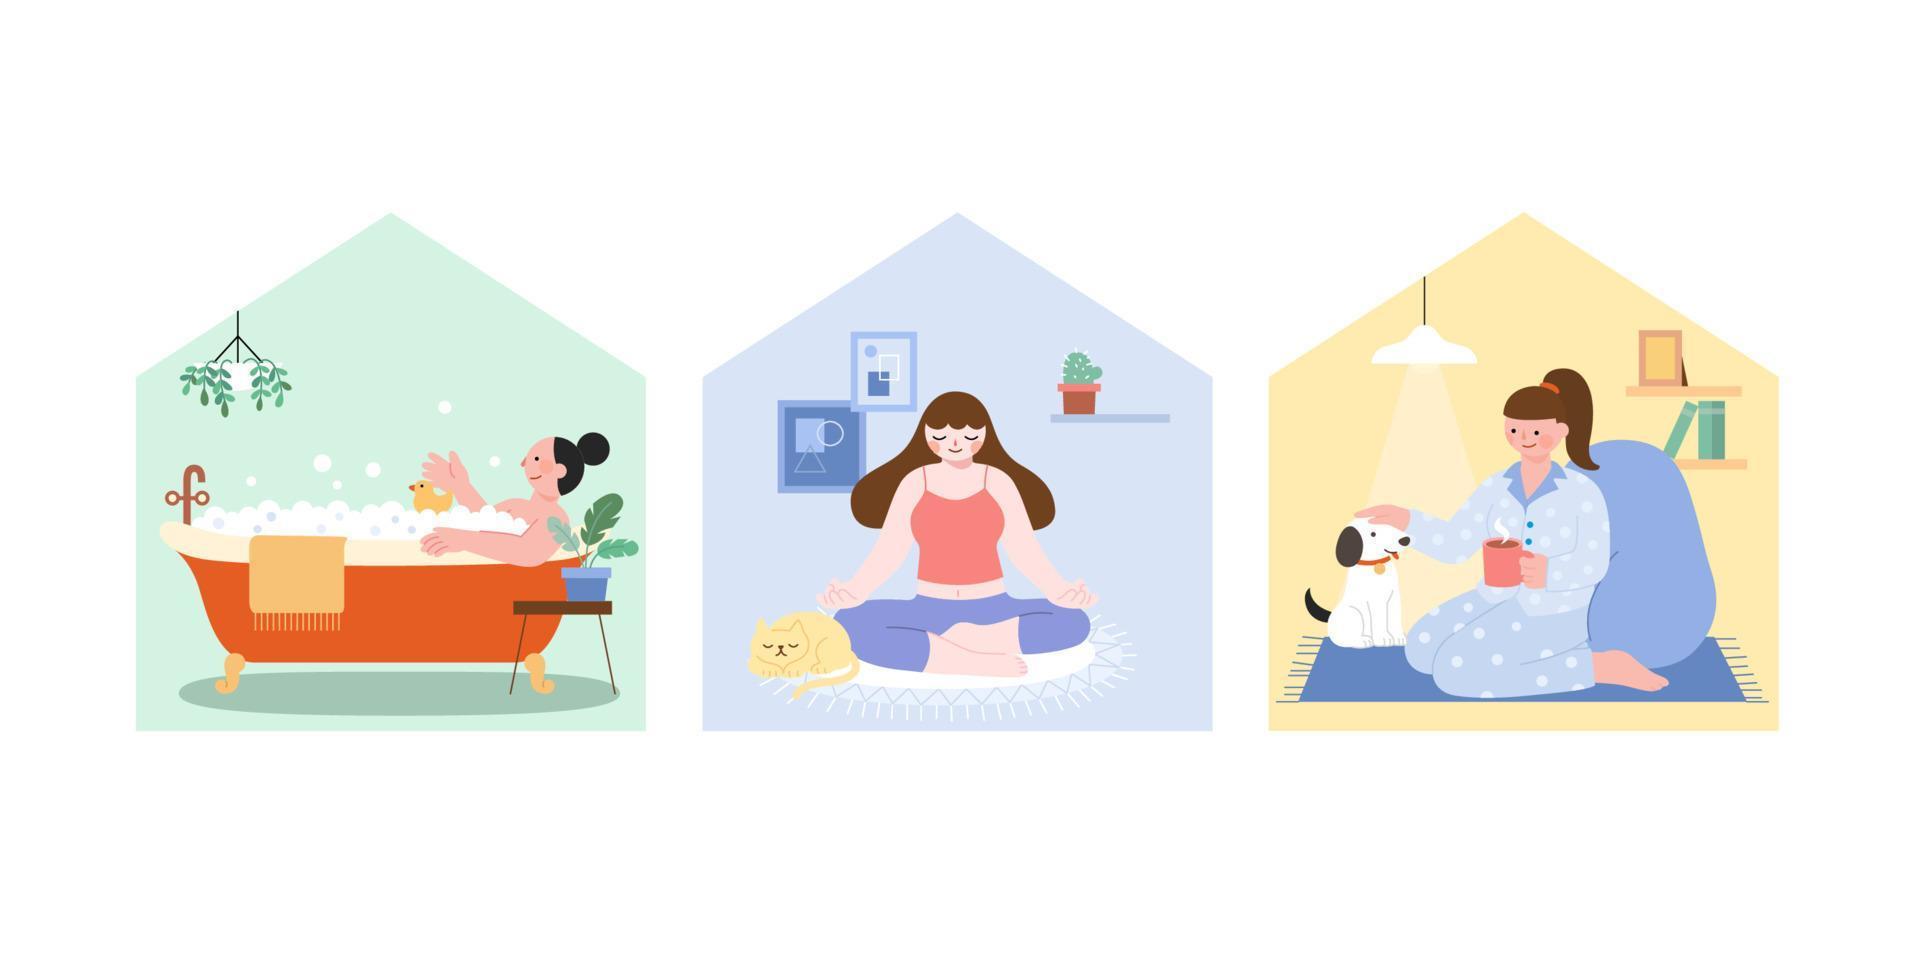 Stay home during quarantine. Illustrations of young women doing different activities at home, including taking bath, doing meditation and enjoying coffee. vector